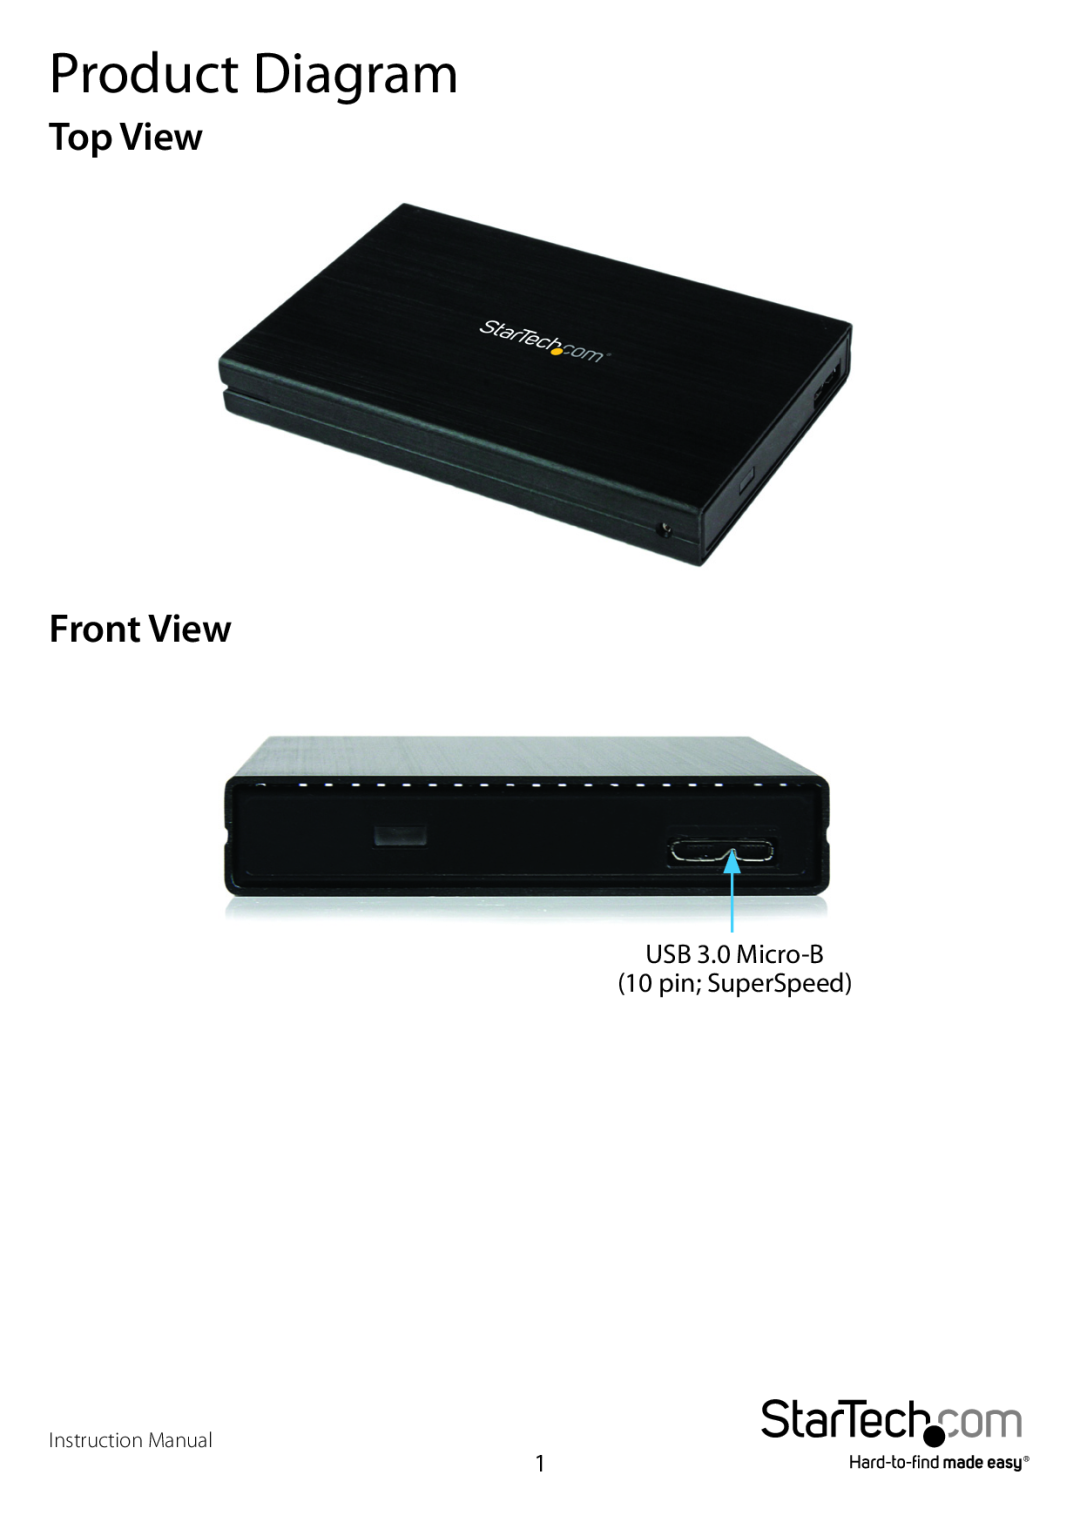 StarTech.com S2510BMU33 manual Product Diagram, Top View Front View 